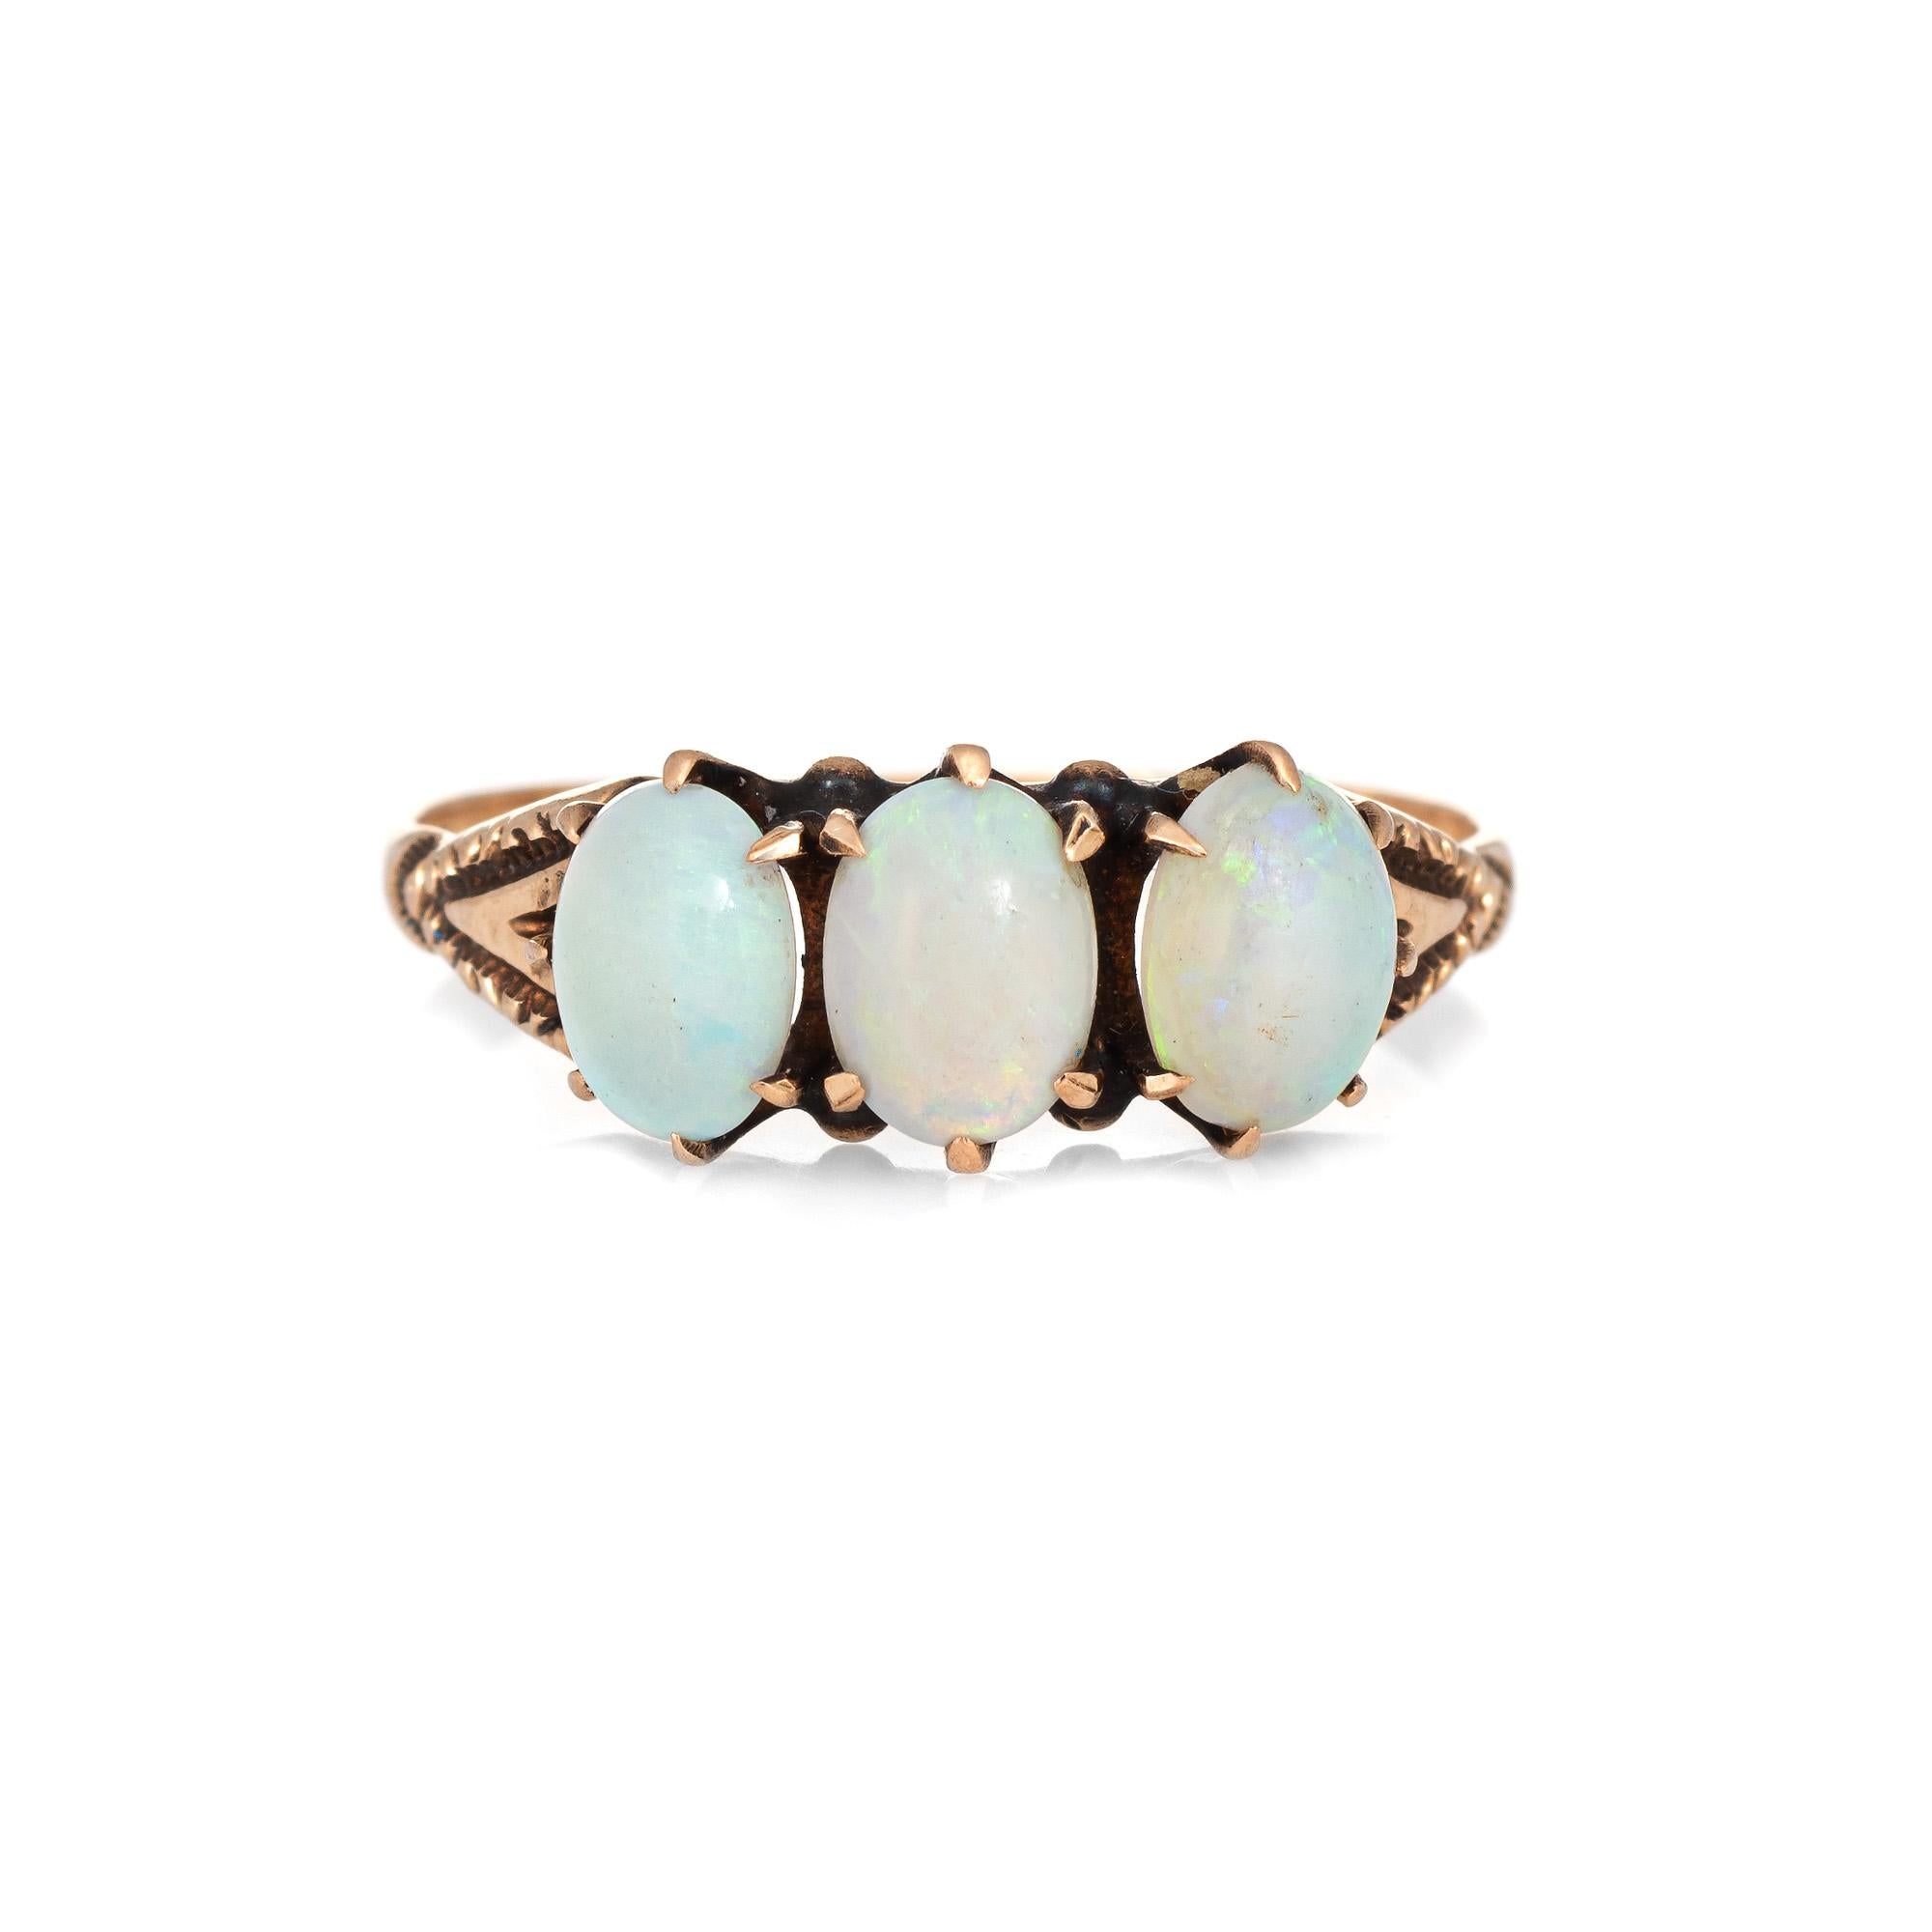 Finely detailed antique Victorian era three stone opal ring (circa 1880s to 1900s), crafted in 14 karat yellow gold.

The ring is made by Ostby & Barton, one of the most well known jewelry manufacturers of the period. The firm was founded in 1879